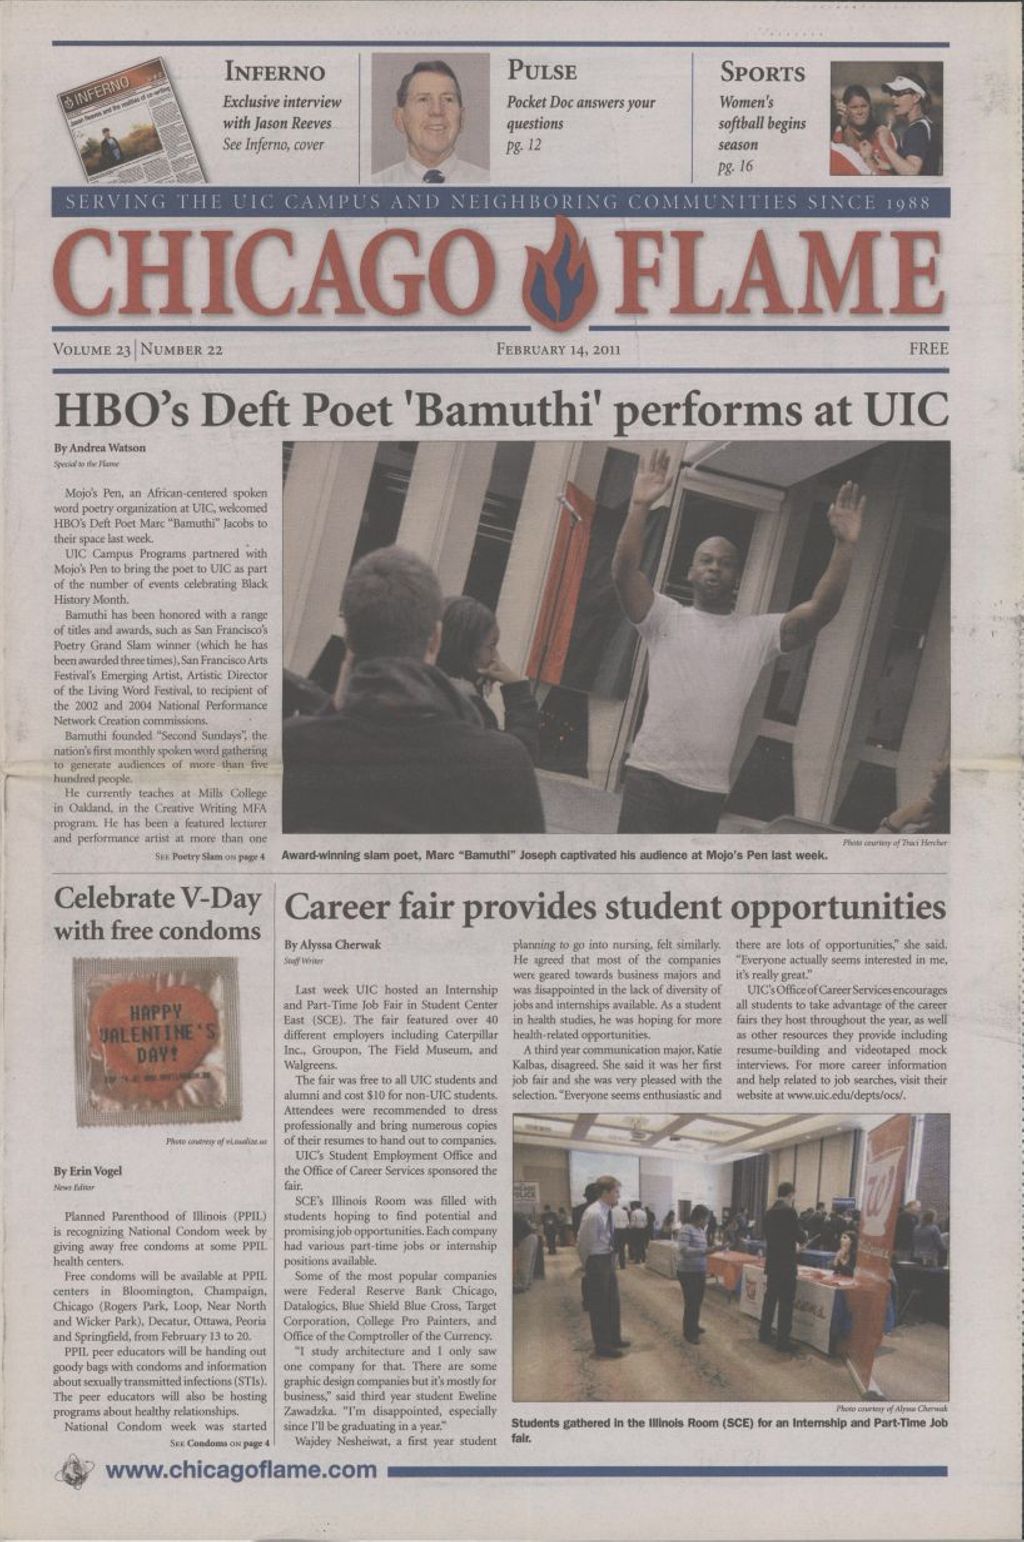 Miniature of Chicago Flame (February 14, 2011)